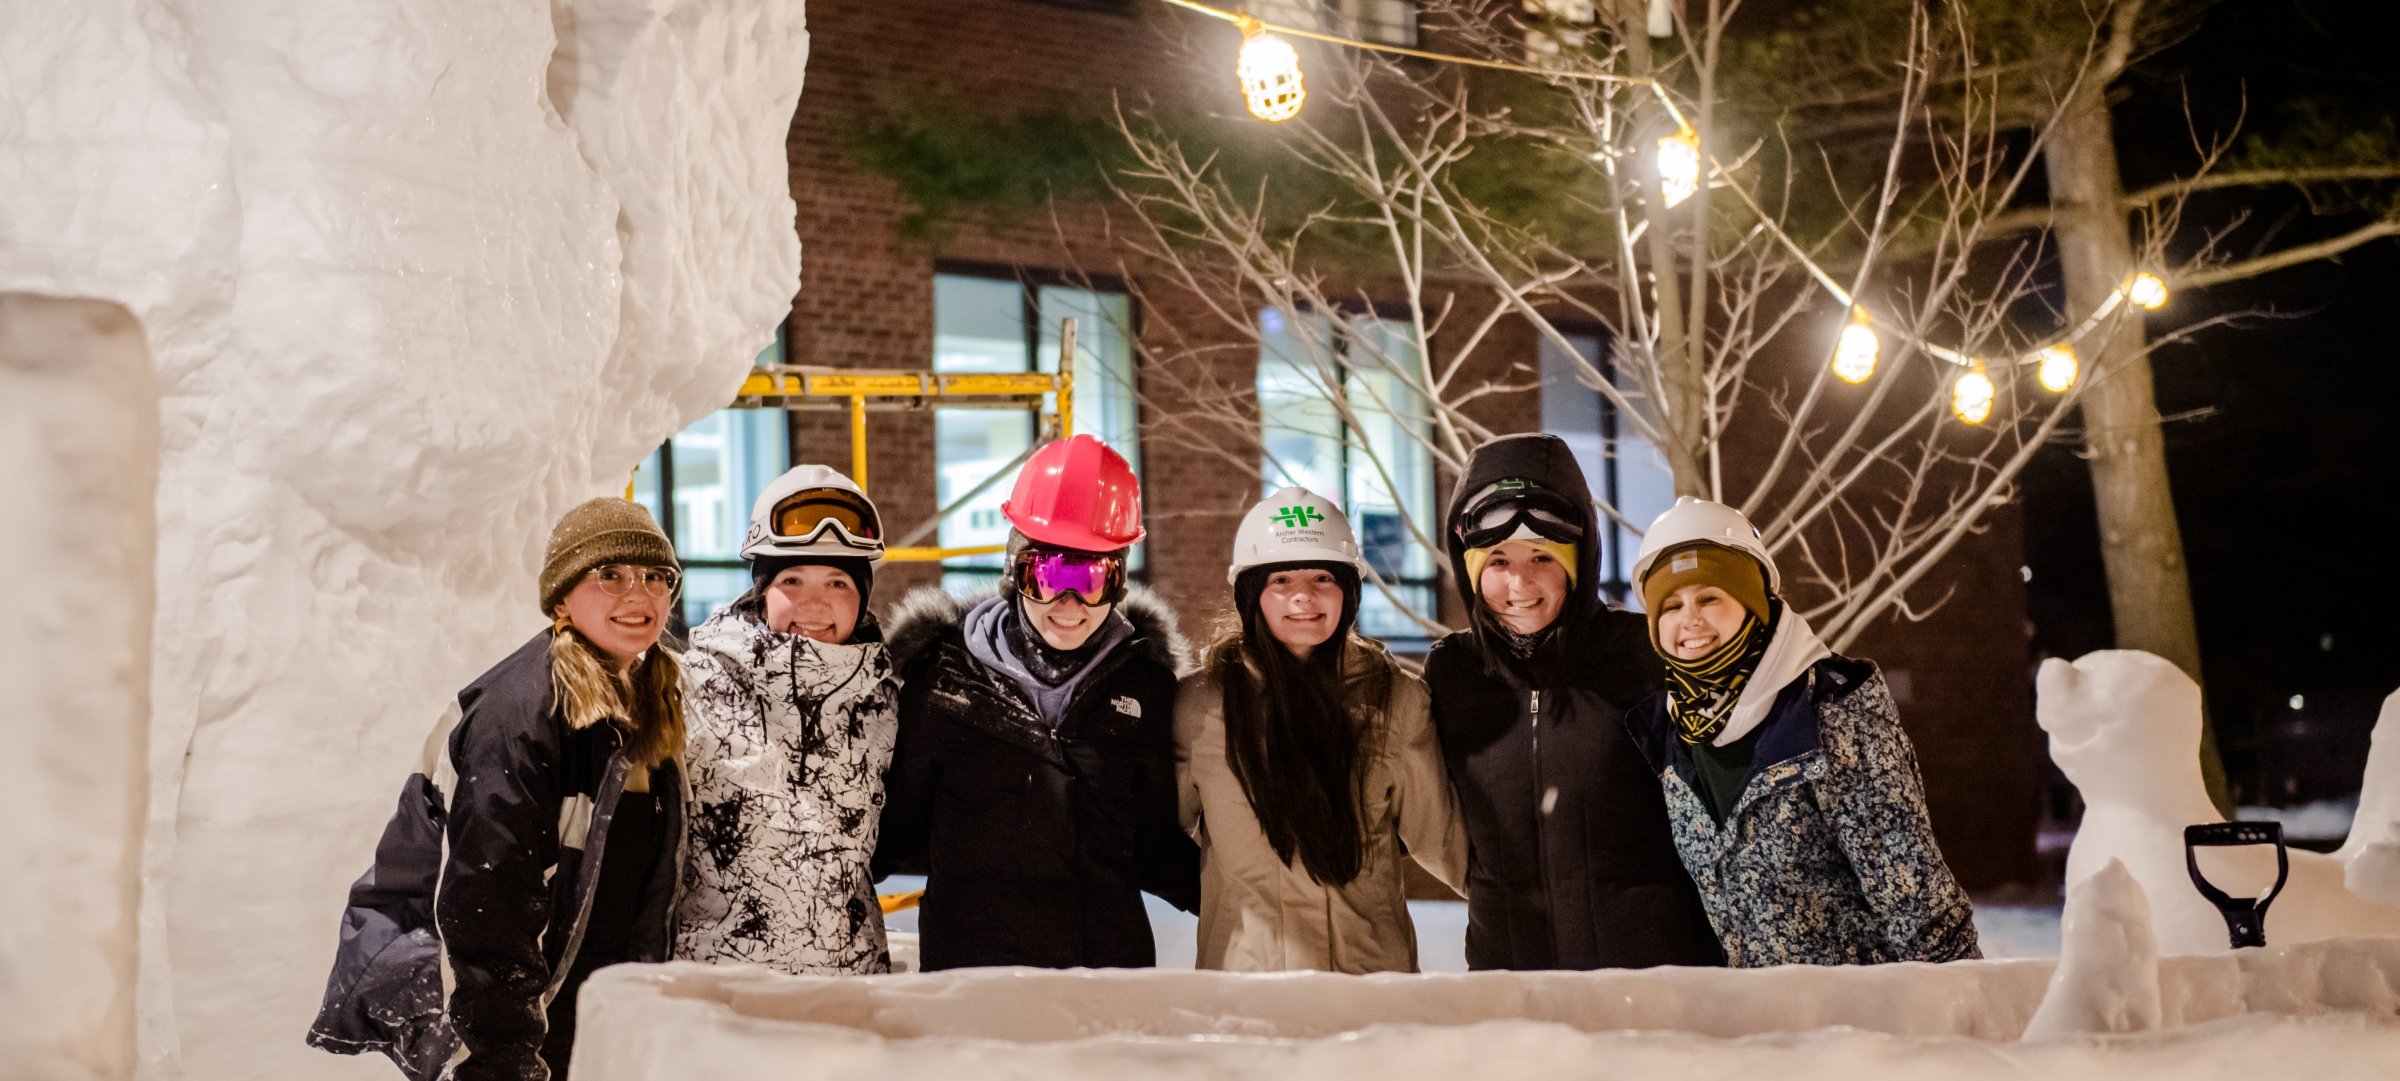 Tech Students Engineer an Event to Remember MTU Winter Carnival